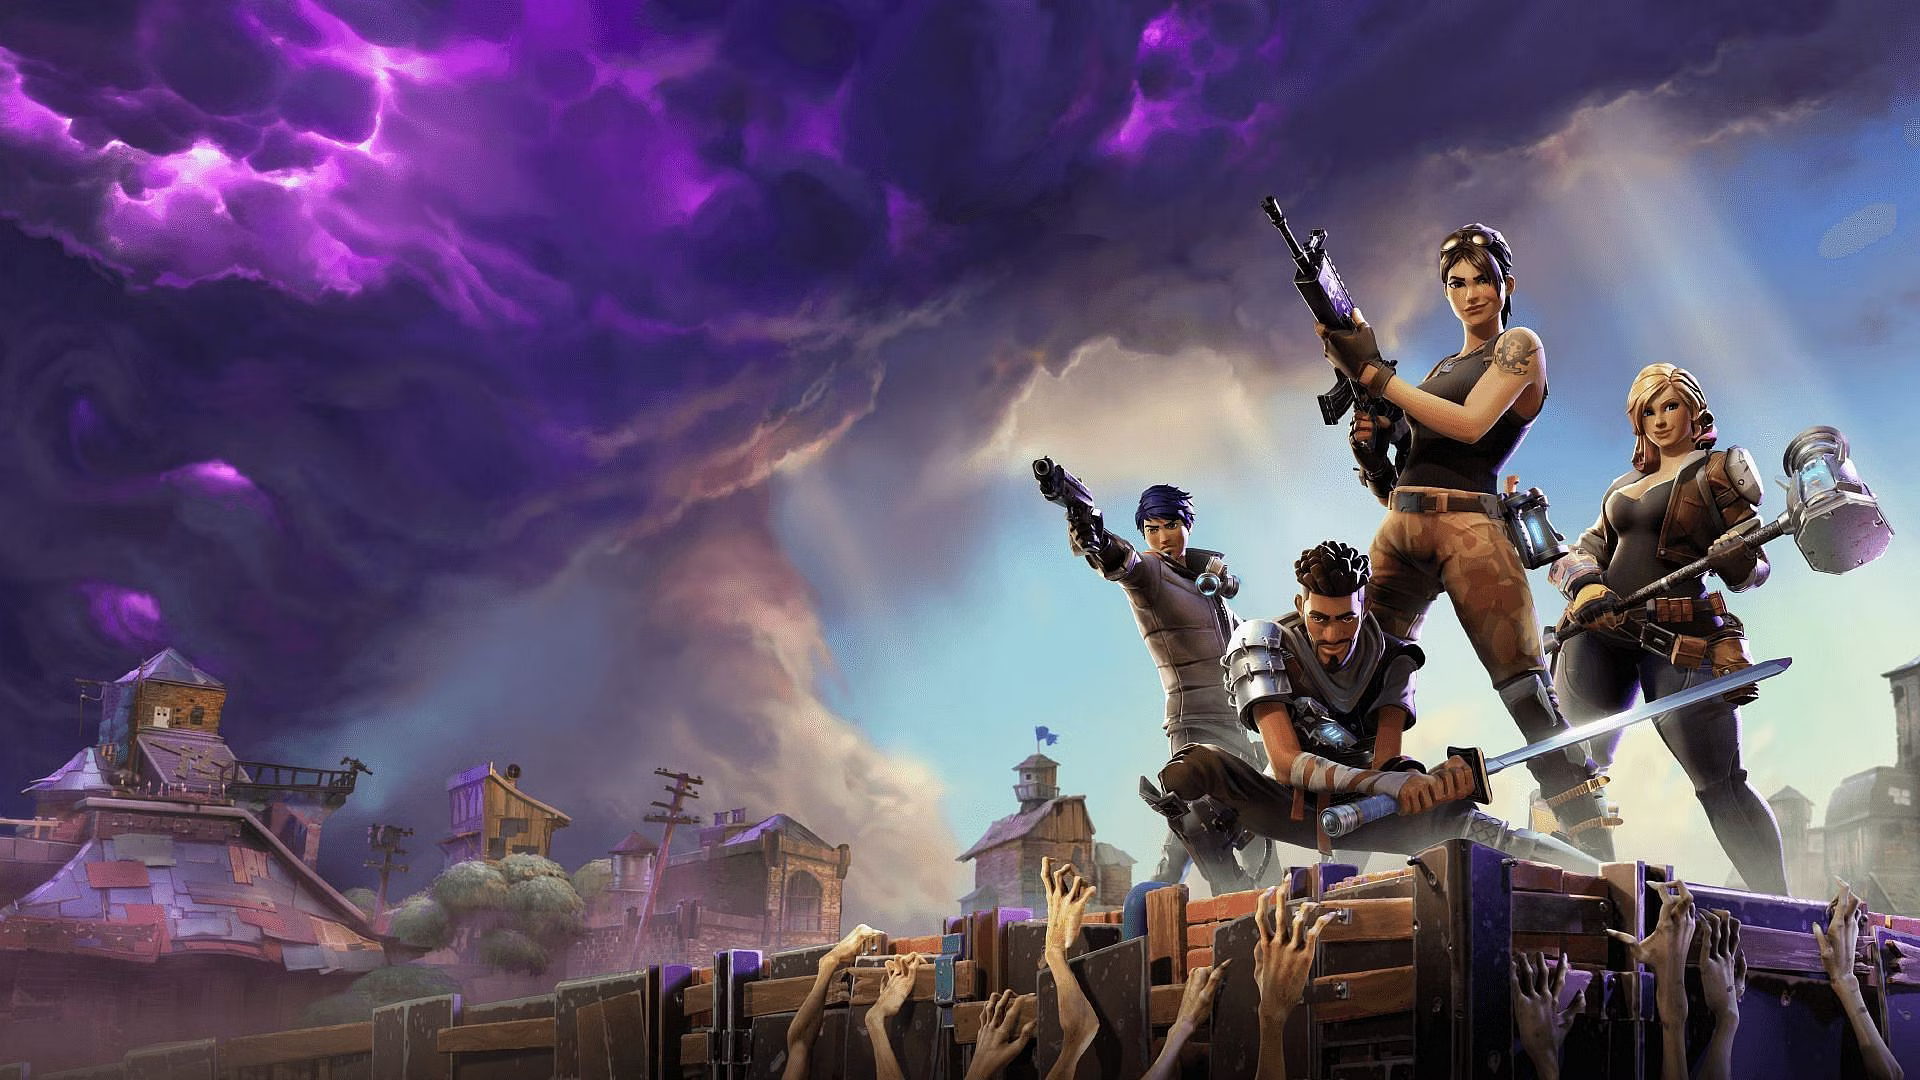 Fortnite - Controversies behind the Popular Video Game